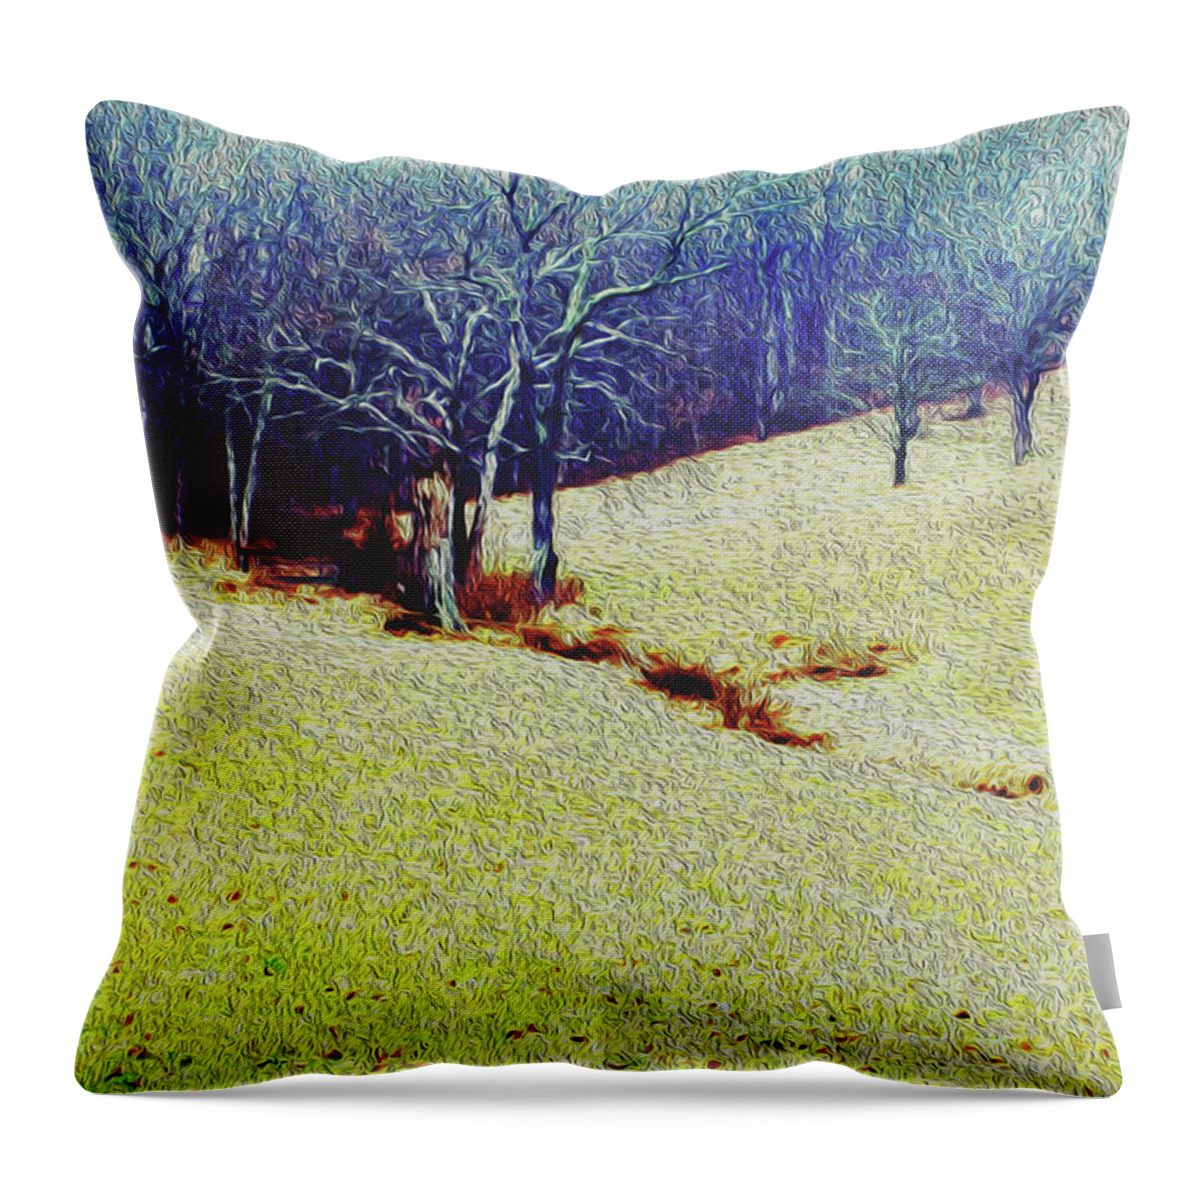 Brandywine Throw Pillow featuring the photograph Brandywine Landscape by Sandy Moulder